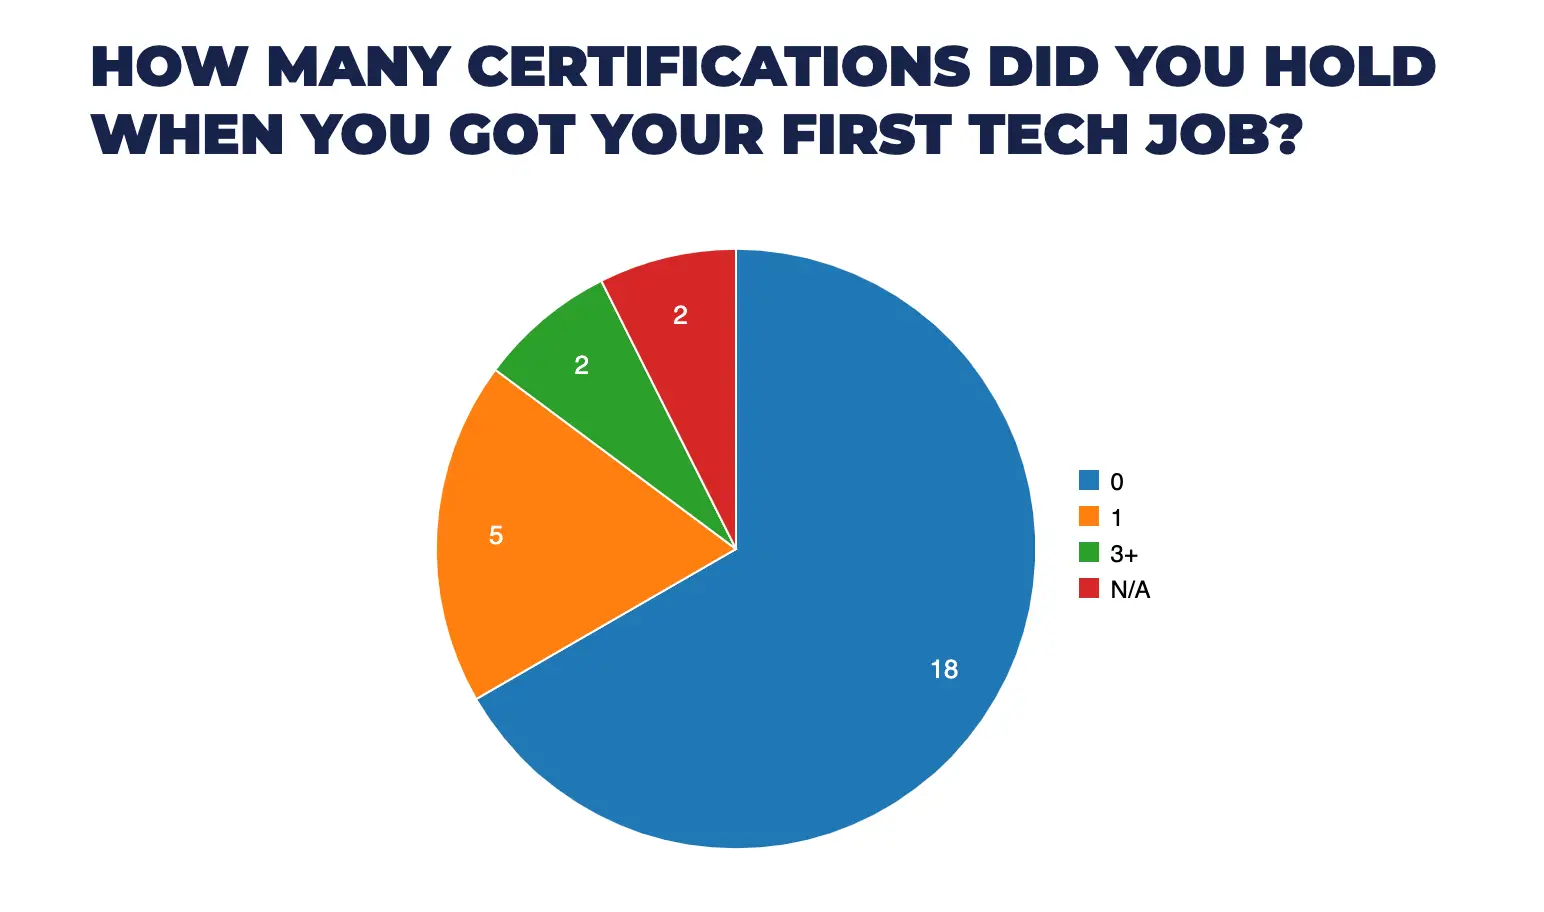 How many certifications did you hold when you got your first tech job?